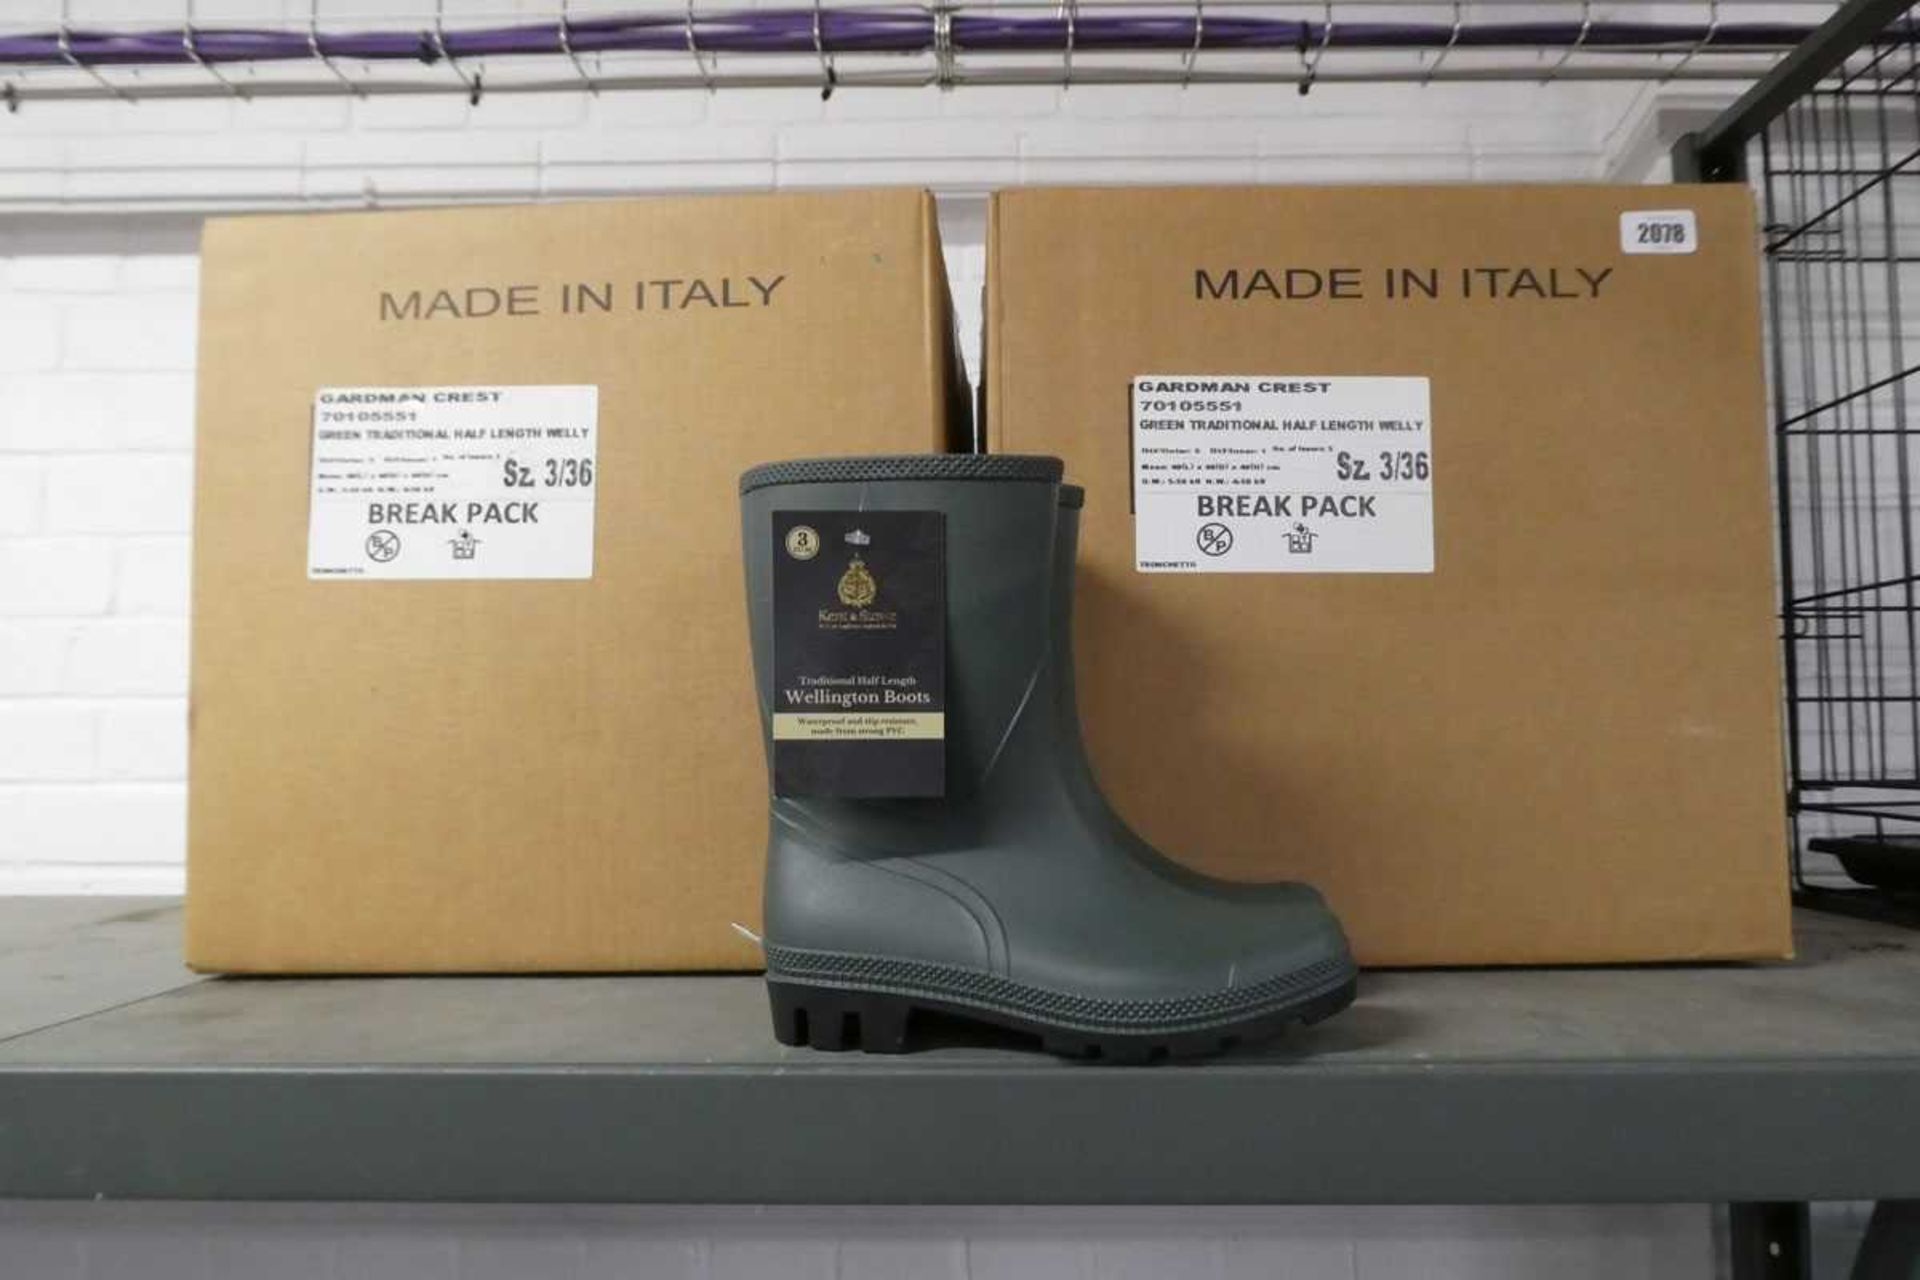 2 boxes containing 10 pairs of Kent & Stowe wellington boots size UK 3